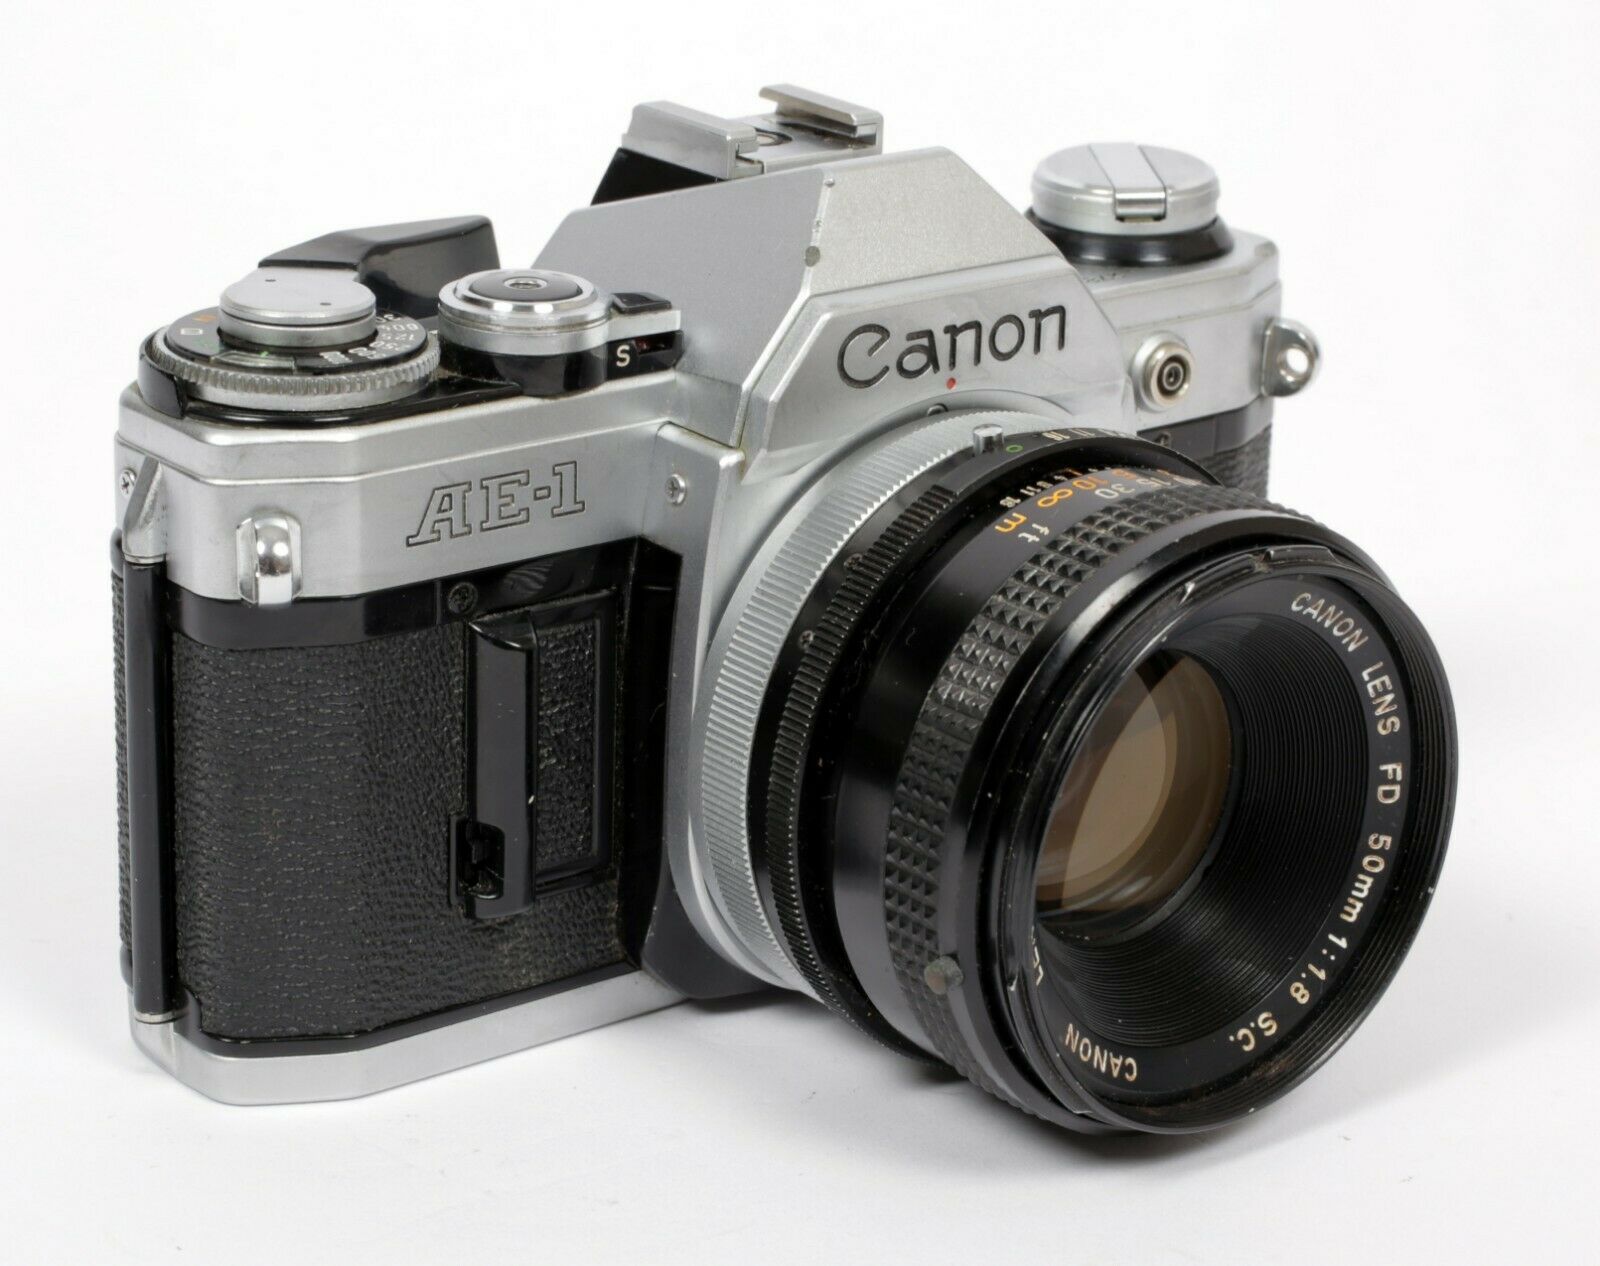 CANON AE-1 35mm SLR Film Camera with FD 50mm F1.8 Lens (TESTED-GUARANTEED)